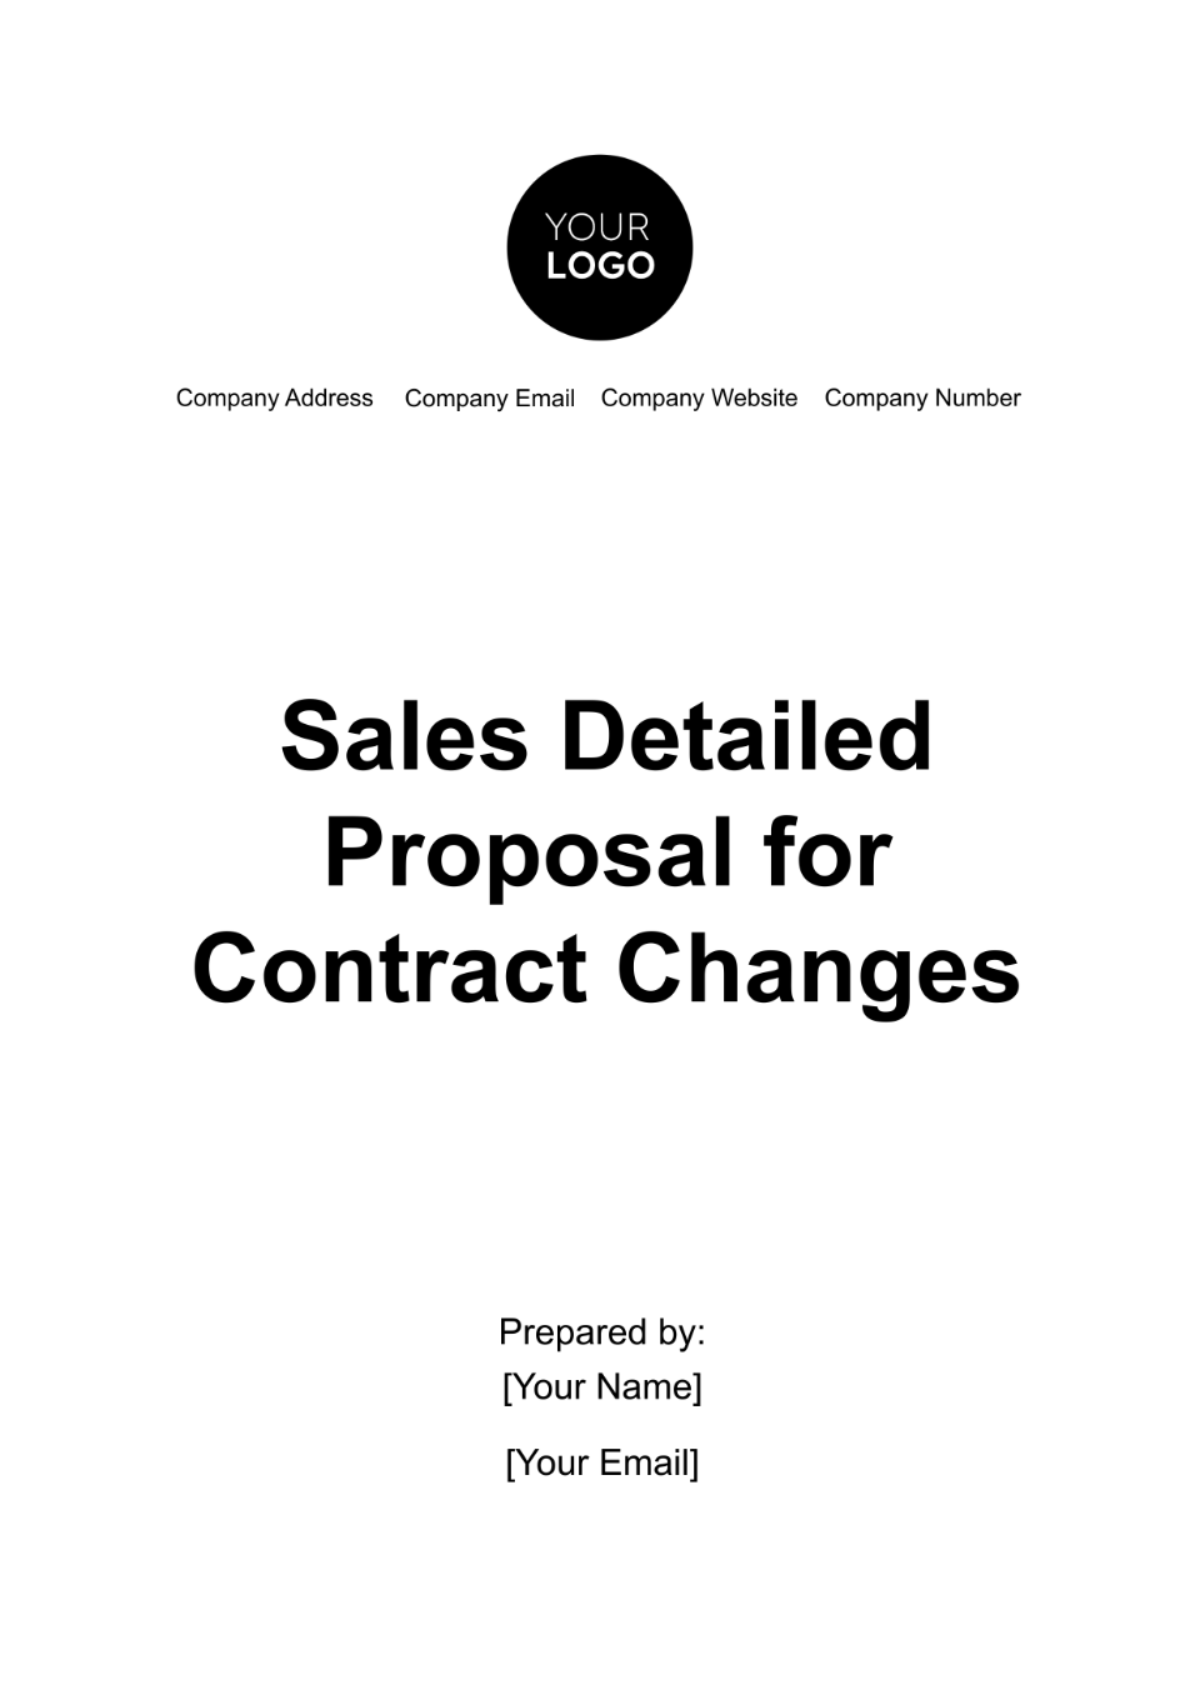 Sales Detailed Proposal for Contract Changes Template